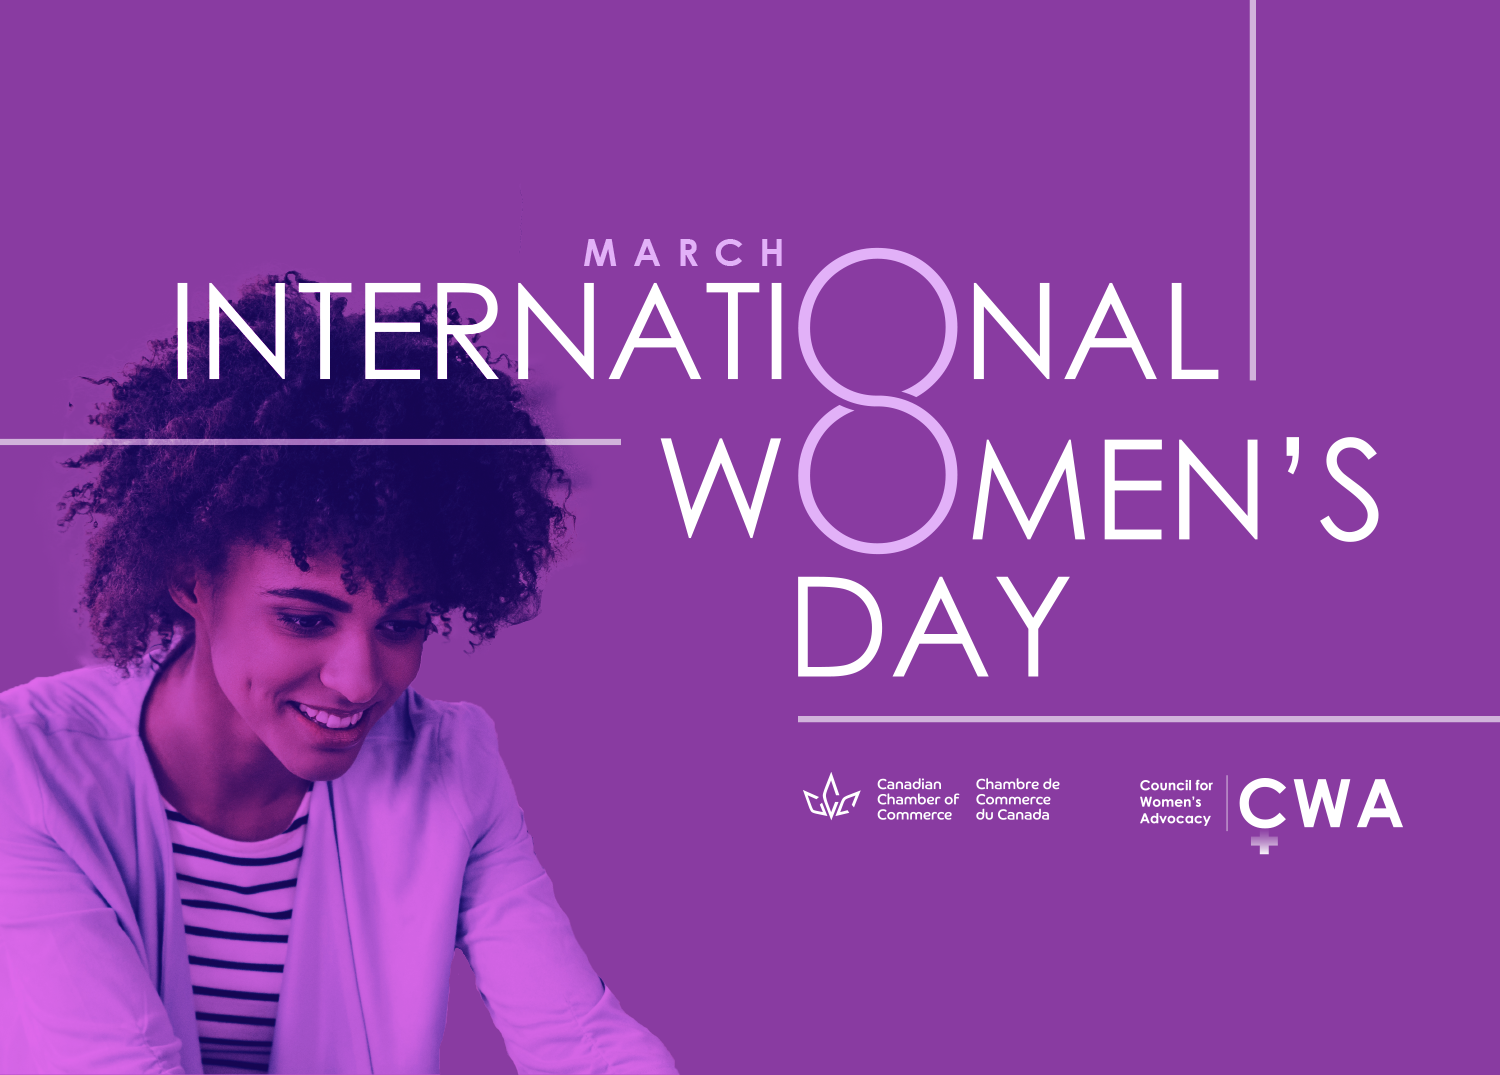 Canadian Chamber of Commerce celebrates International Women's Day/Week with  spotlight on women in the workforce, Council for Women's Advocacy and the  need for federal government action - Canadian Chamber of Commerce